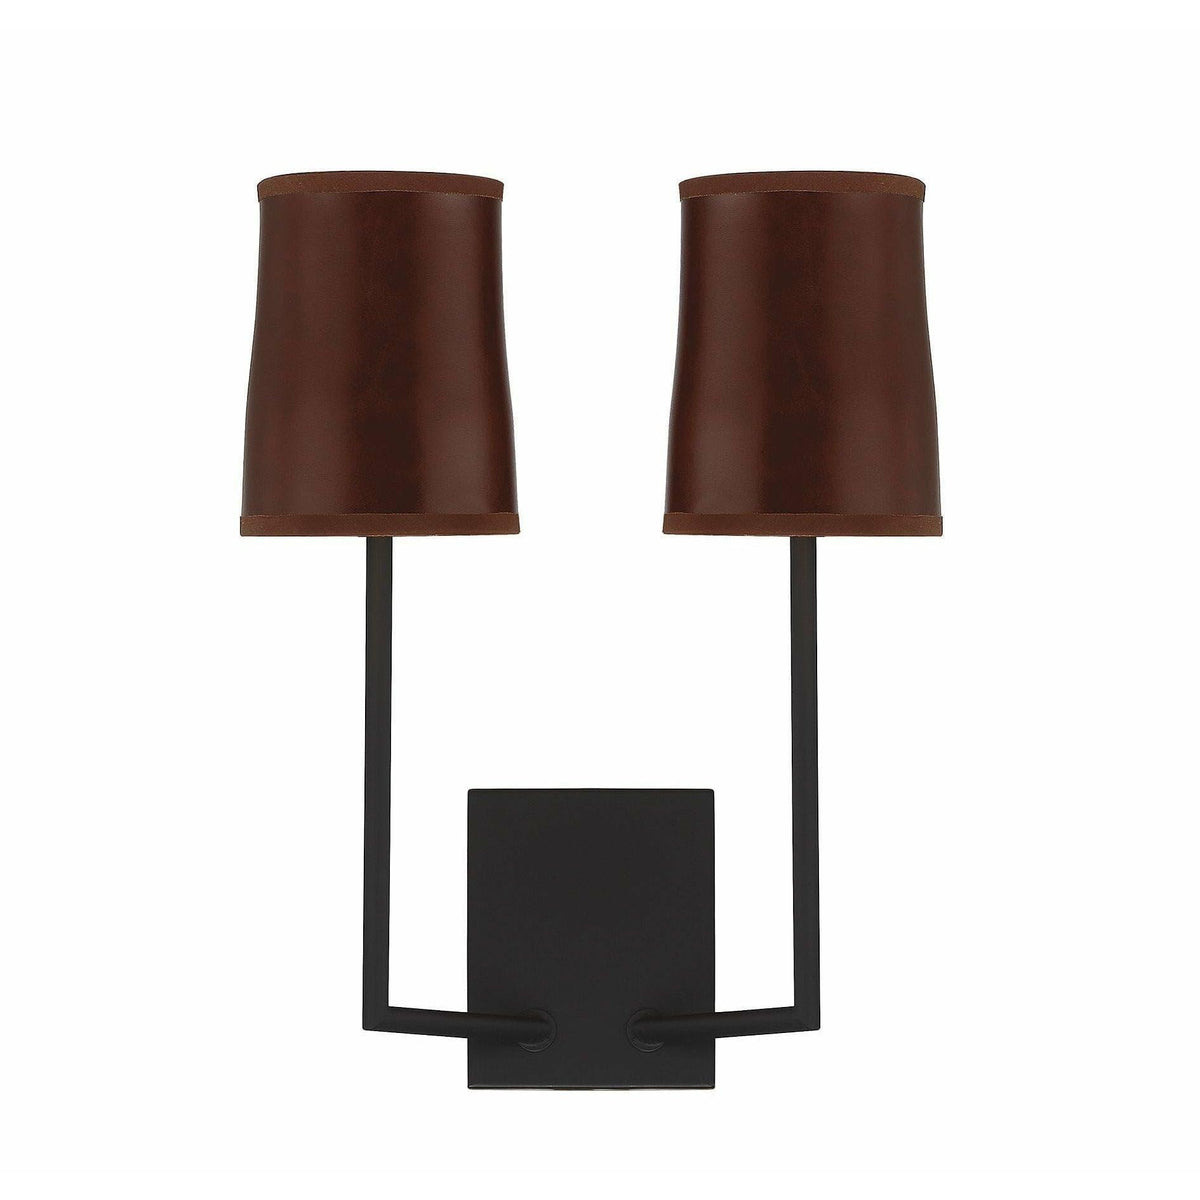 Meridian Lite Trends - Meridian Two Light Wall Sconce - M90061MBK | Montreal Lighting & Hardware